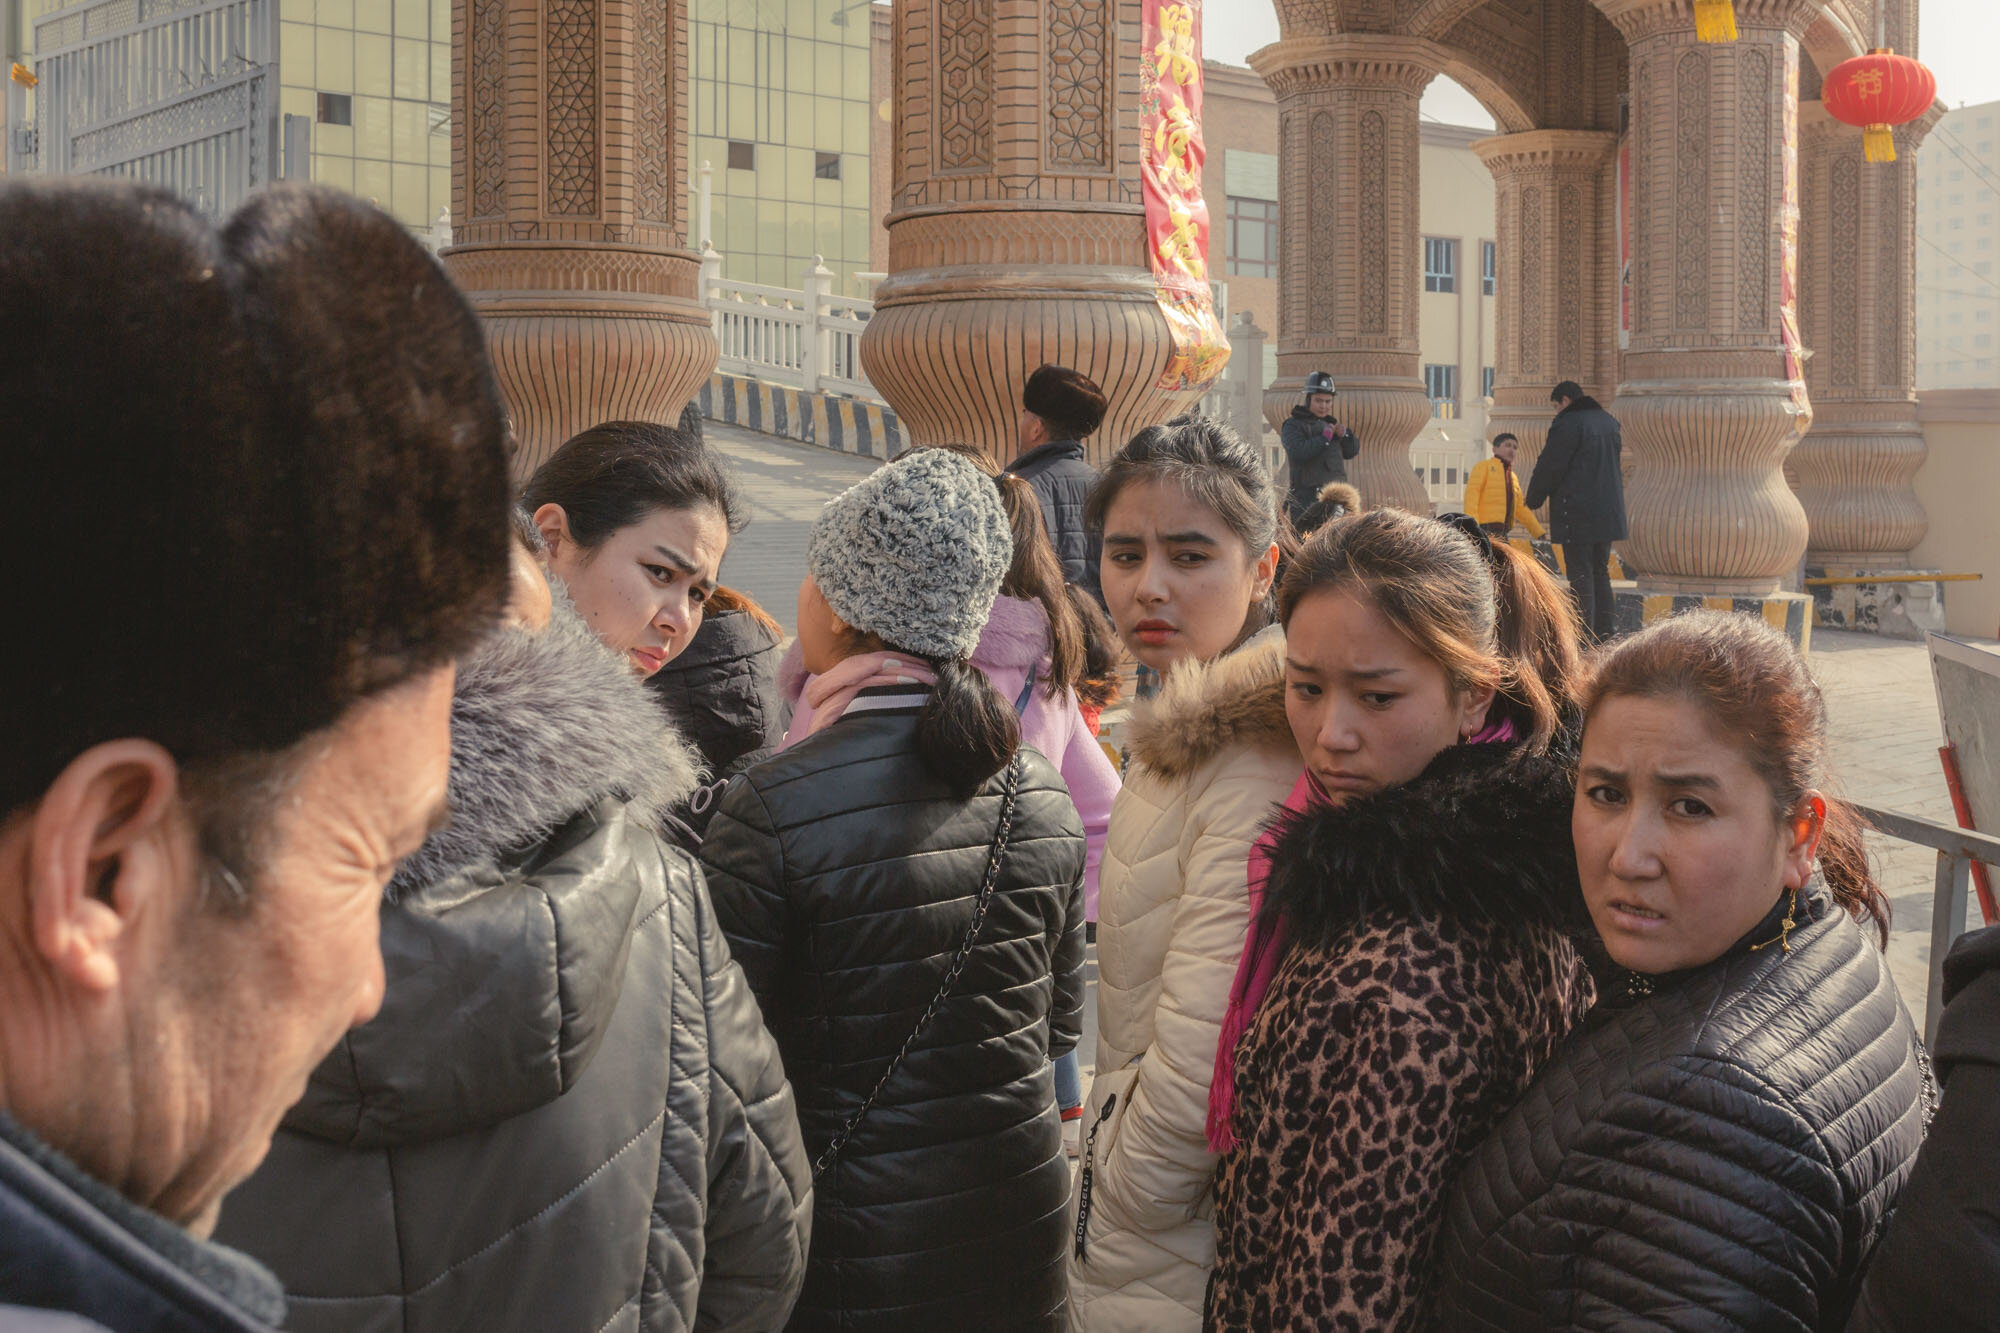  February 3rd 2019. Hotan, Xinjiang province. Uighur-minority locals wait in line for ID check and body searches before entering the local bazar. 